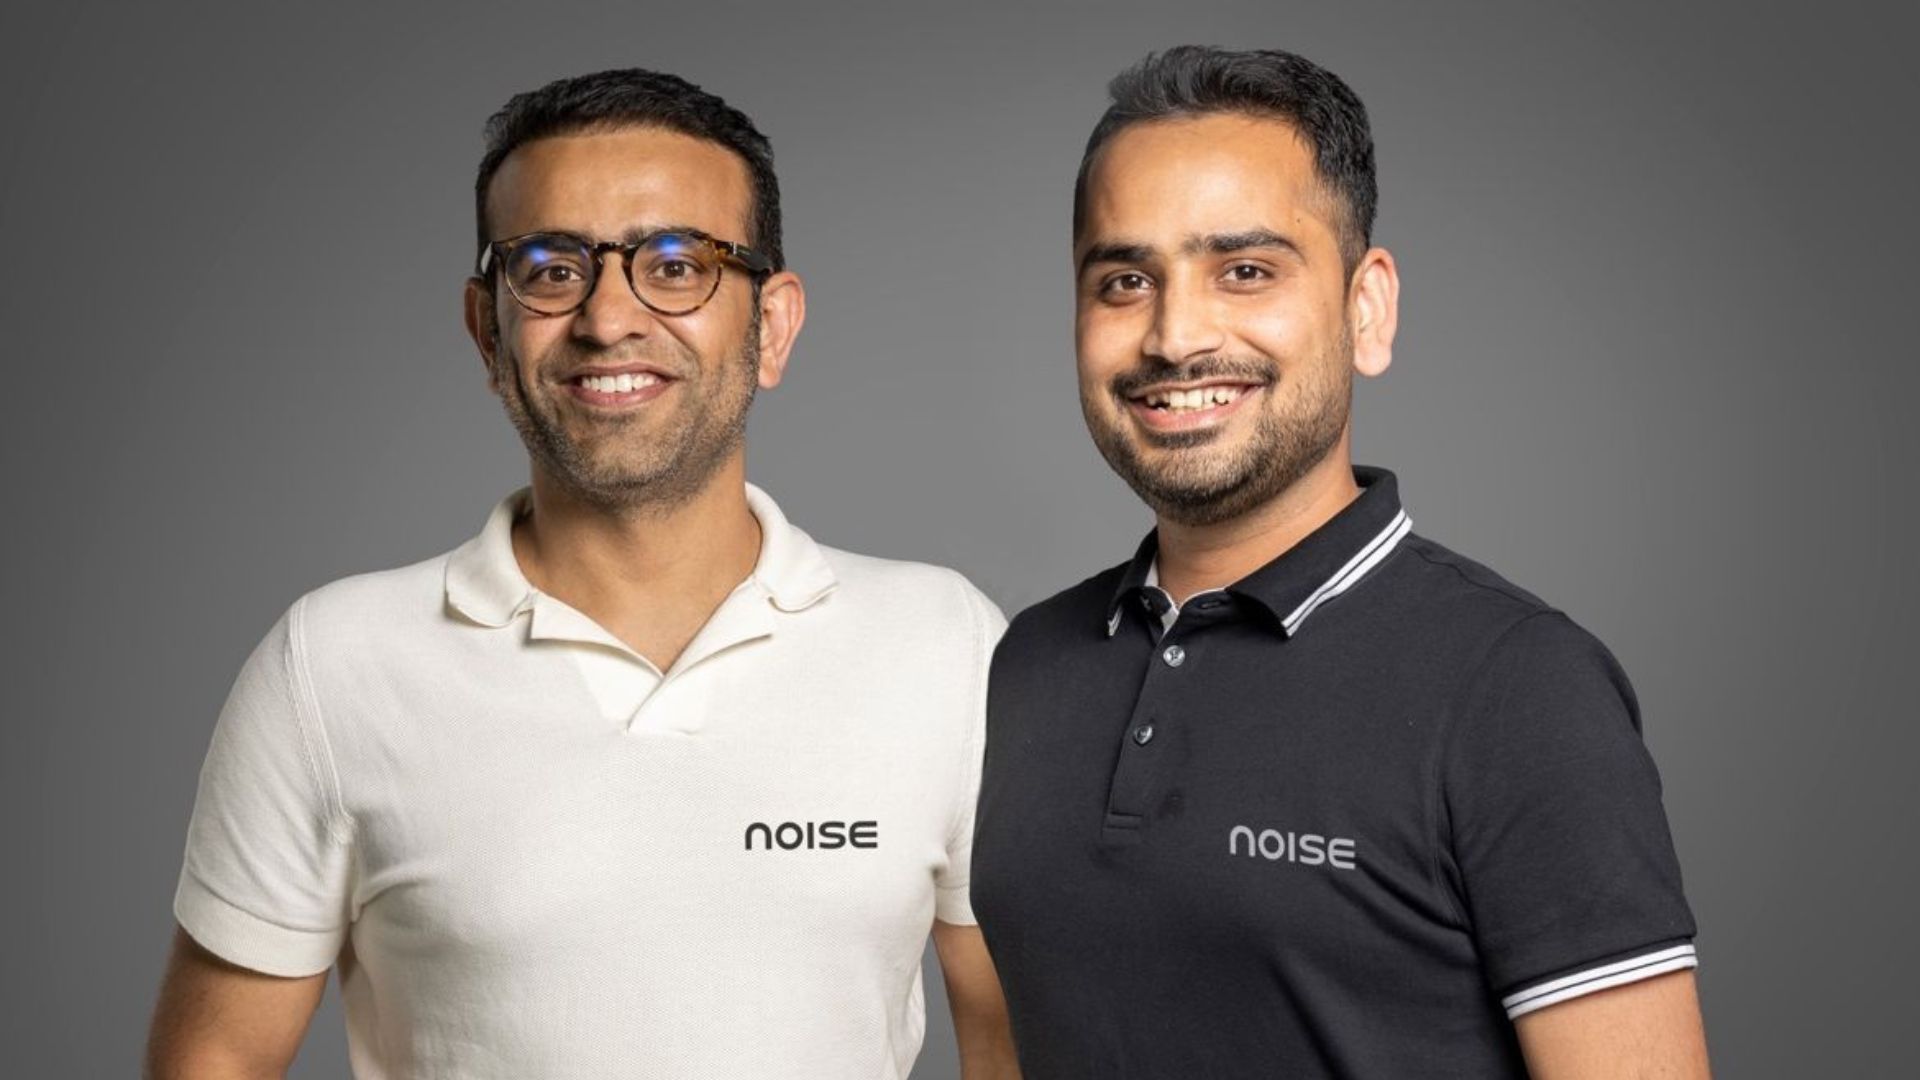 noise-acquires-socialboat-to-improve-women-s-health-tracking-features-in-luna-ring